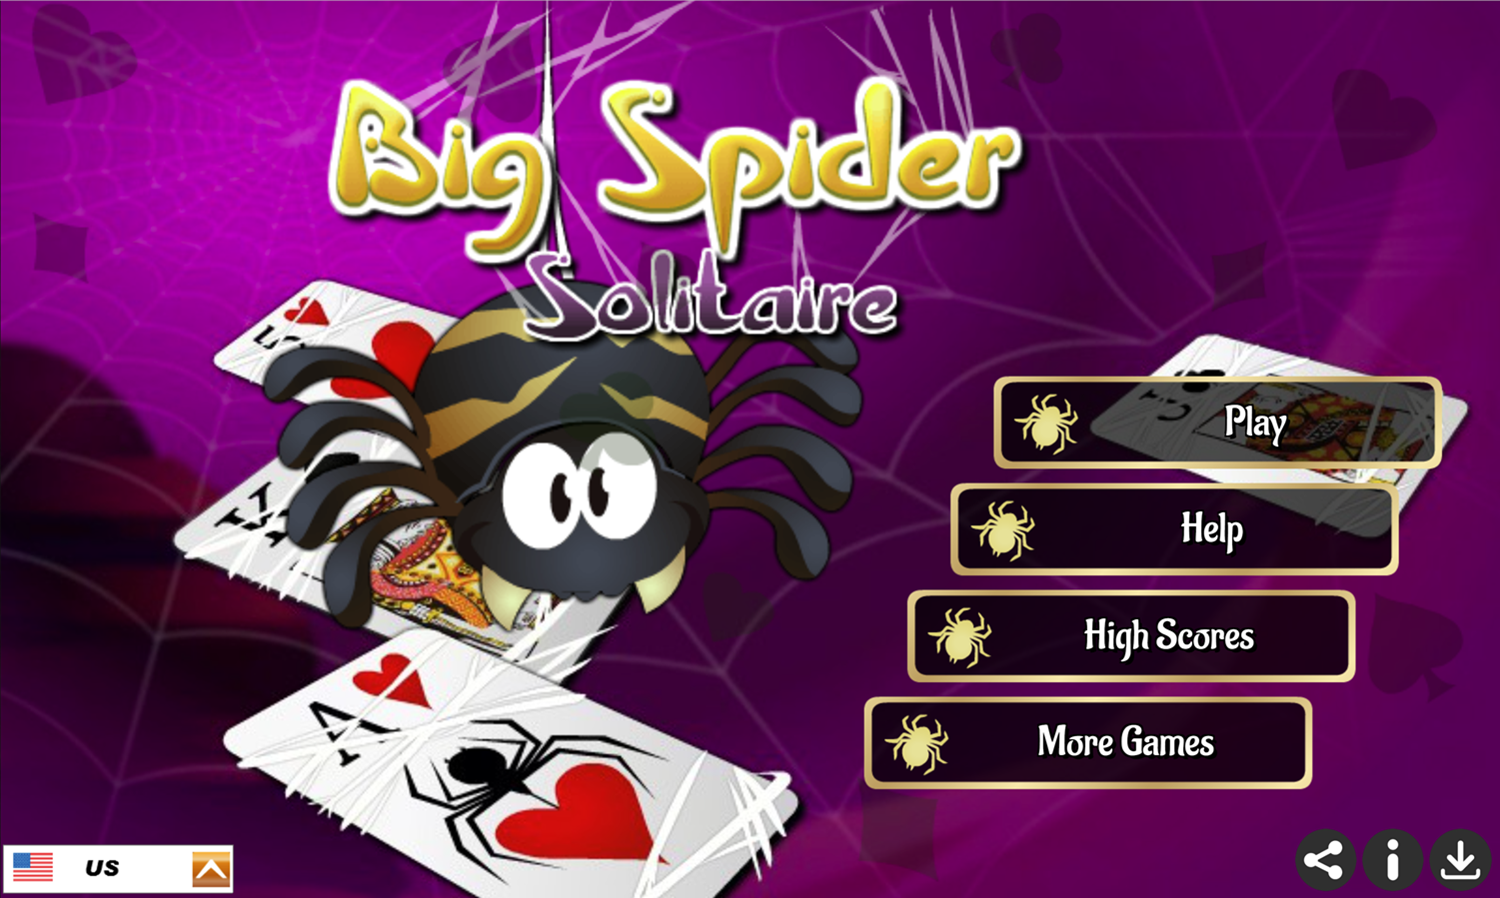 Big Spider Solitaire Game Welcome Screen Screenshot.